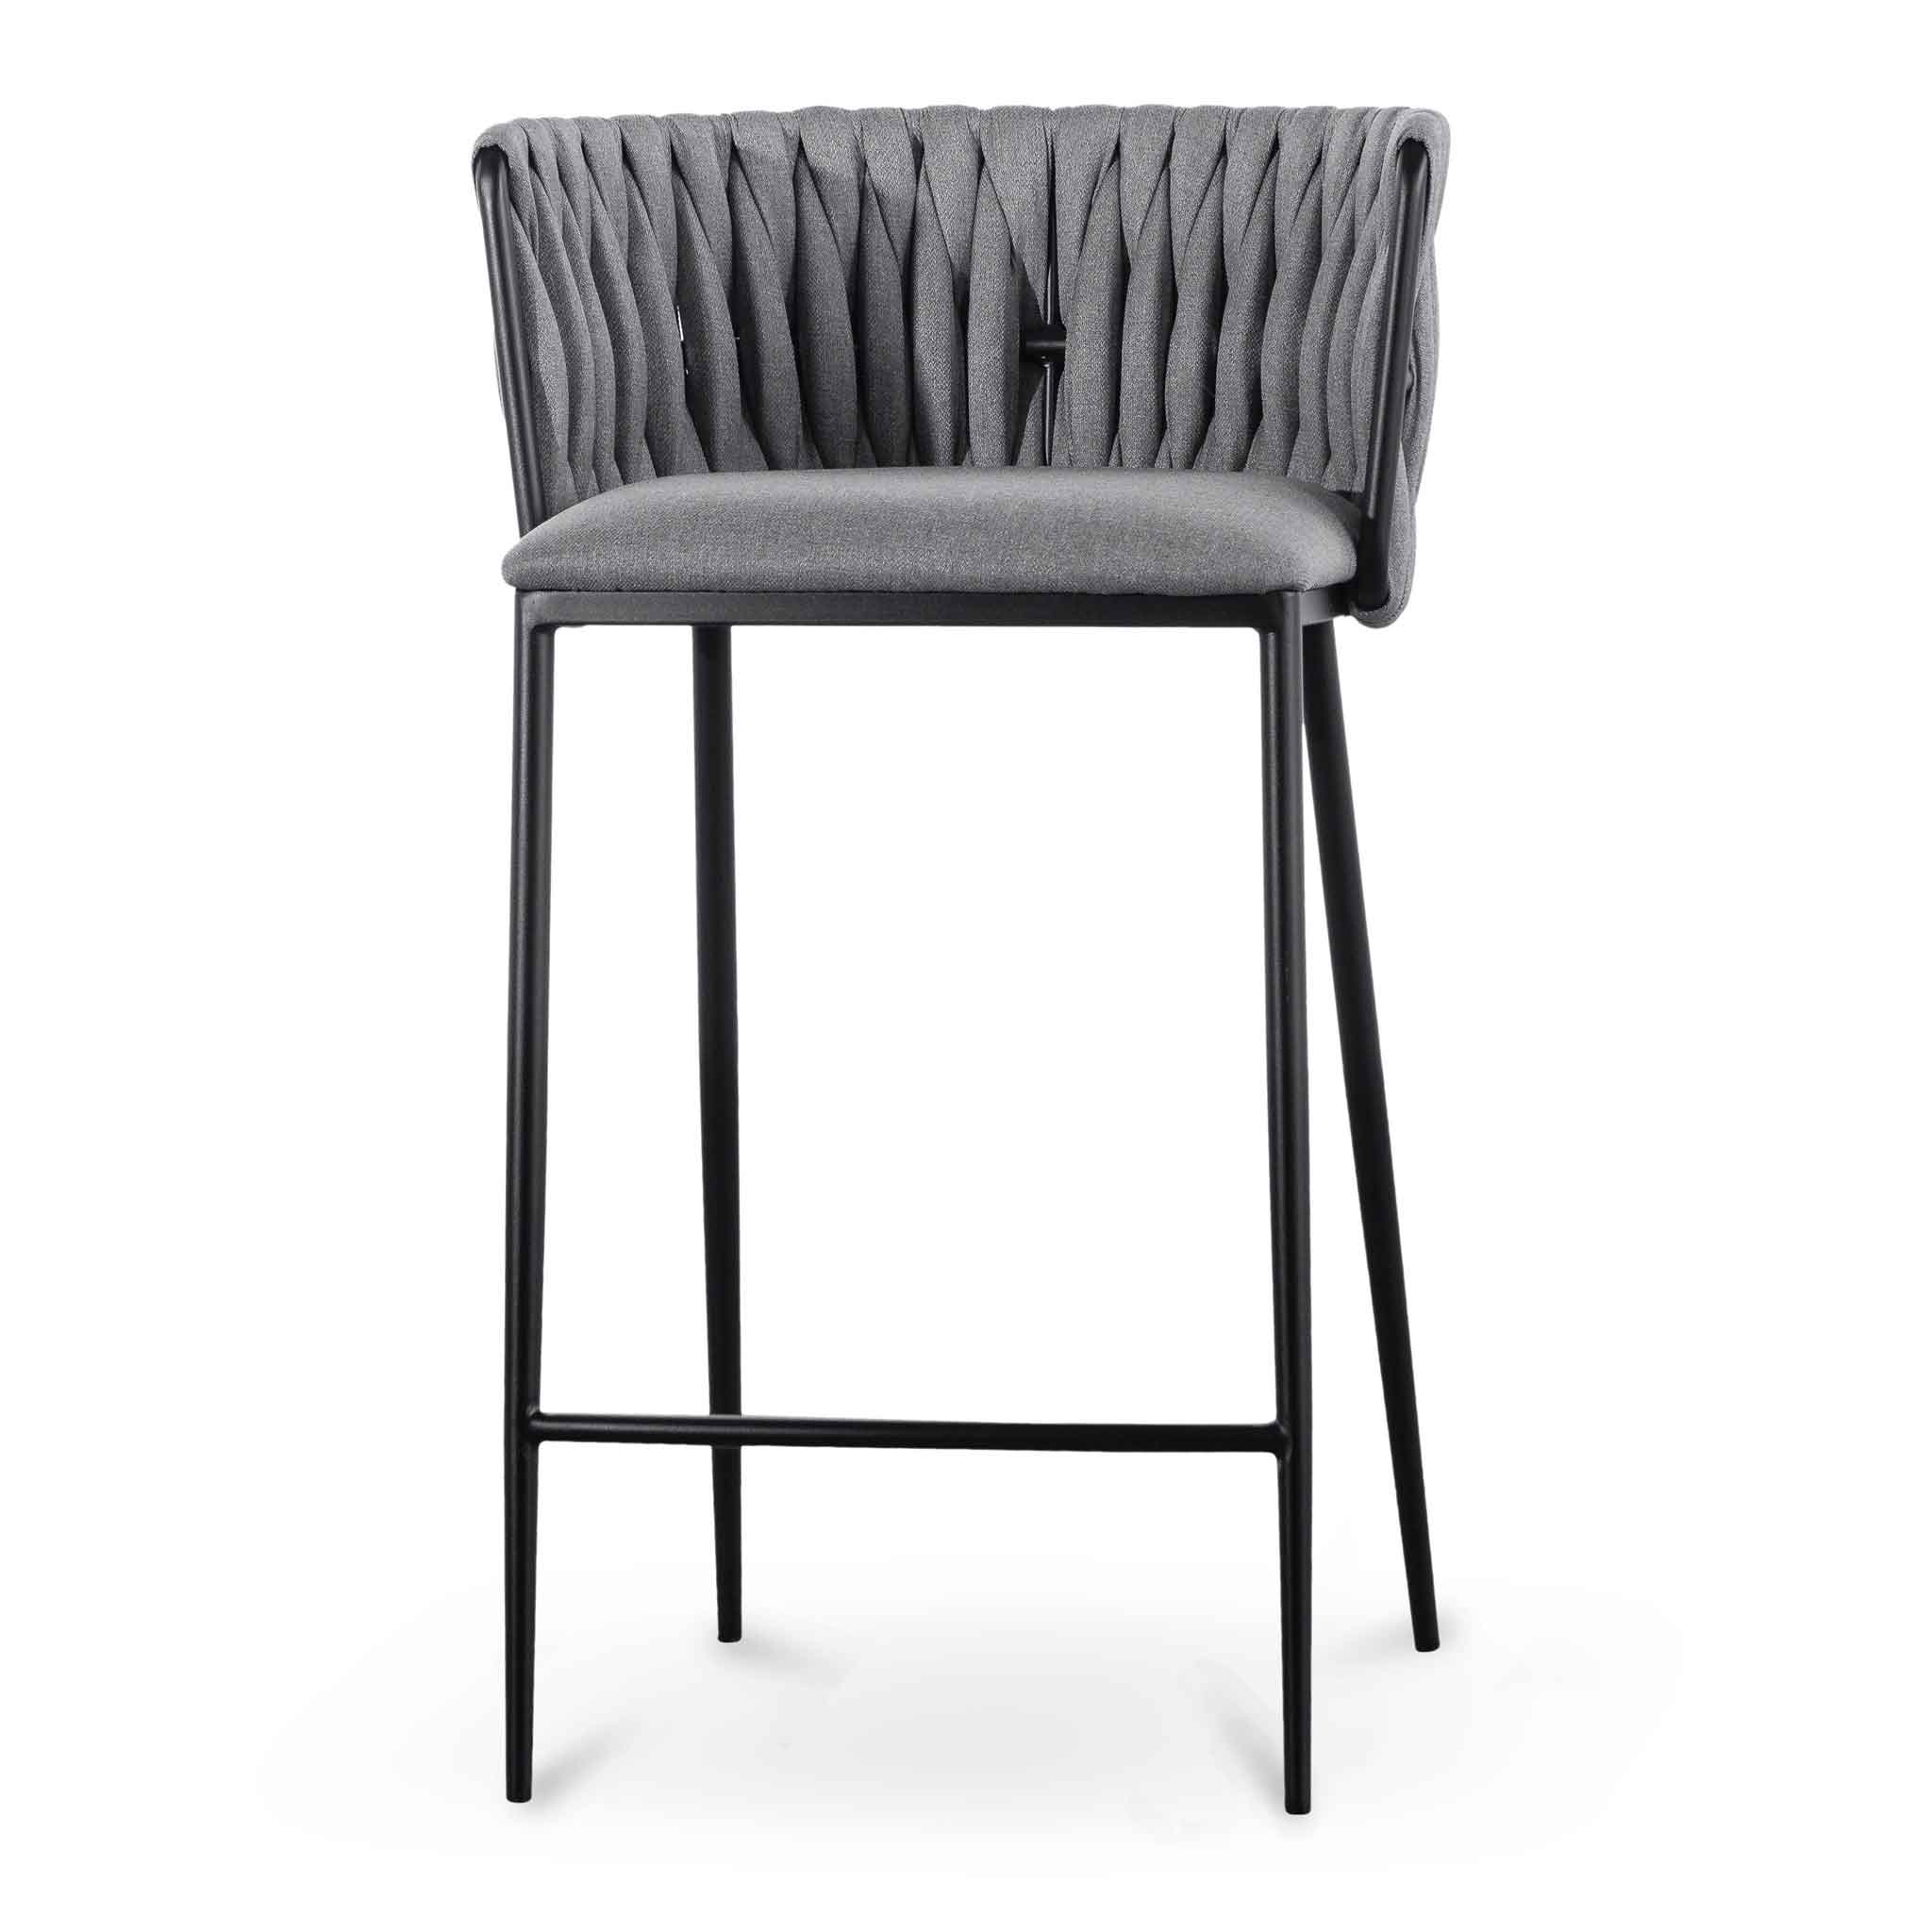 Piper 65cm Fabric Bar Stool - Coin Grey with Black Legs